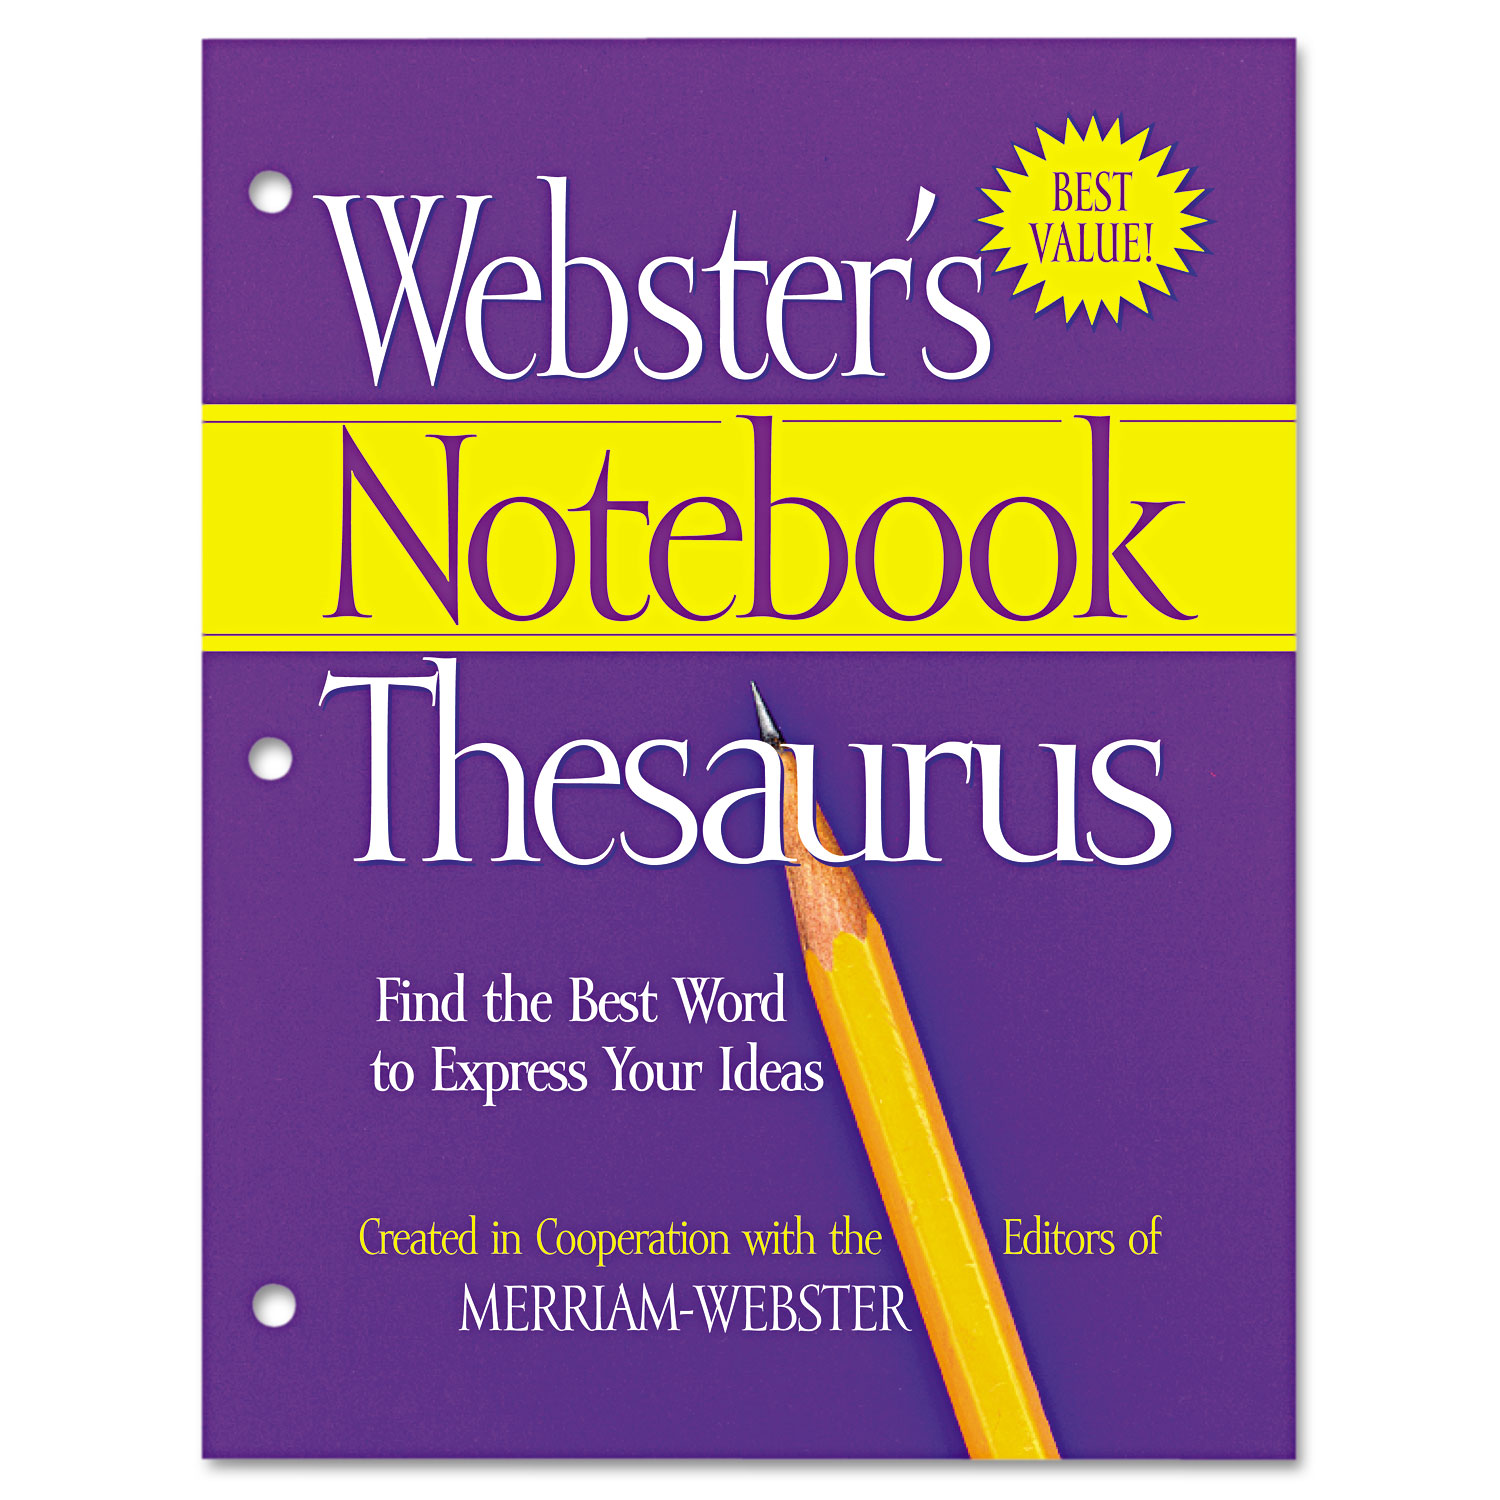  Merriam Webster FSP0573 Notebook Thesaurus, Three-Hole Punched, Paperback, 80 Pages (MERFSP0573) 